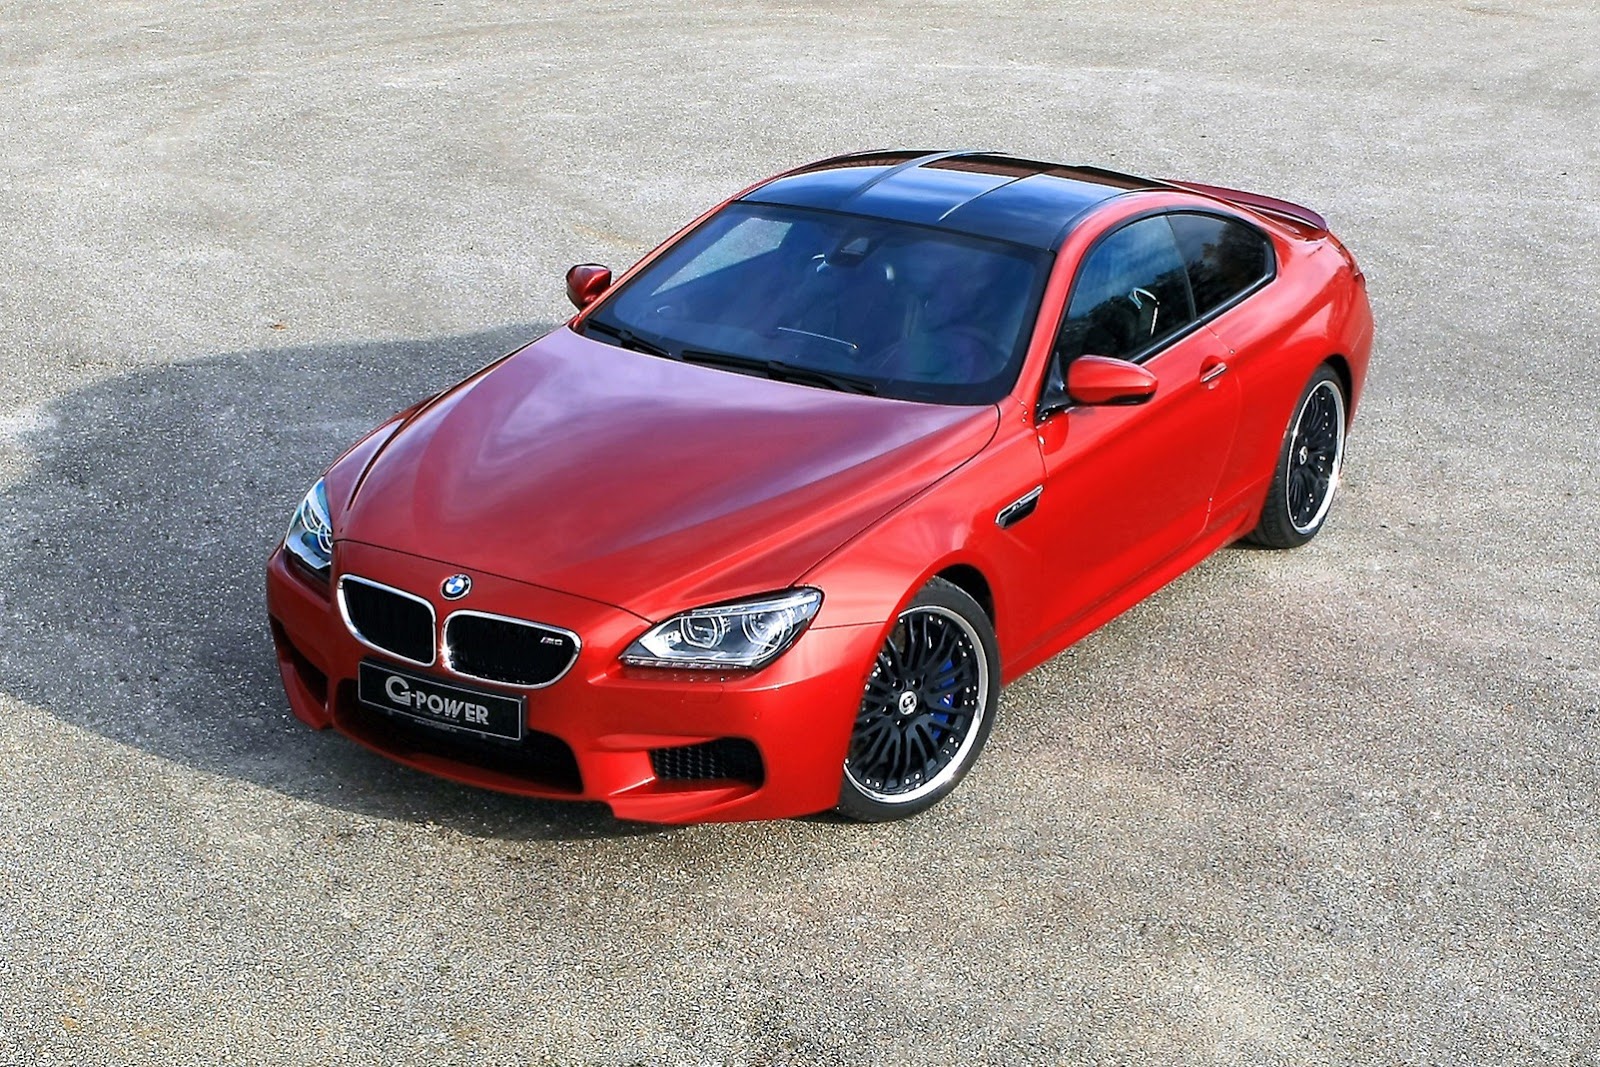 BMW M6 Coupe by G-Power